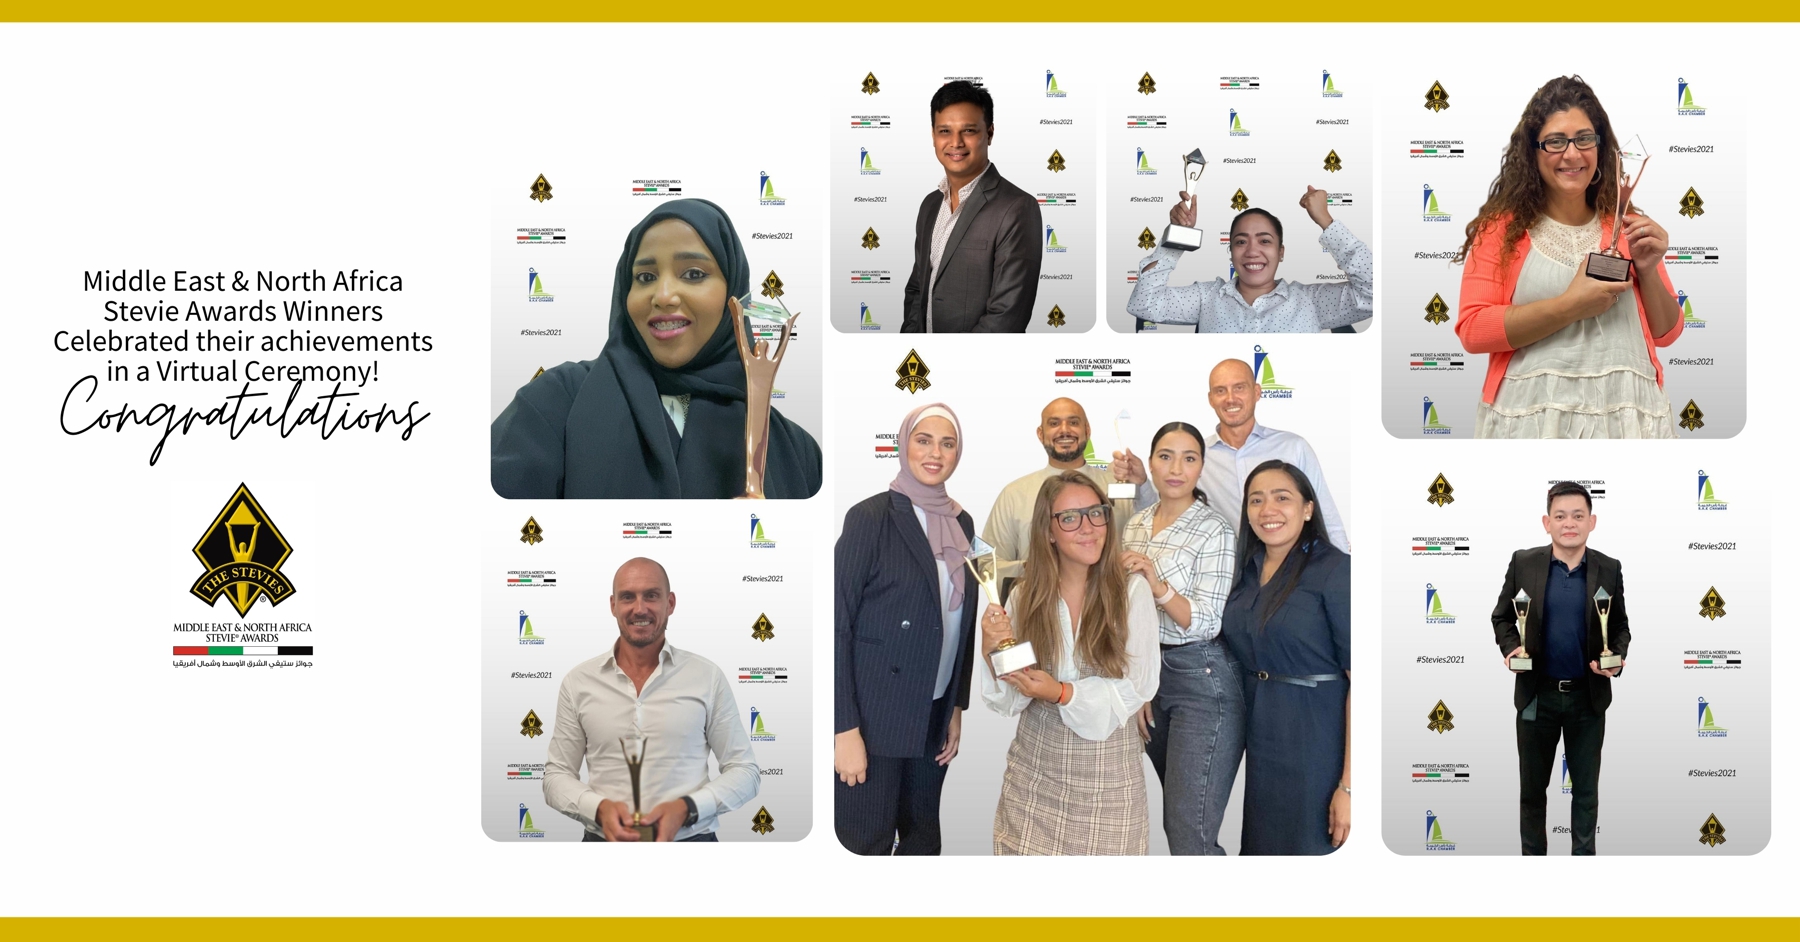 Second Annual Middle East & North Africa Stevie® Awards Winners Honored In Virtual Ceremony